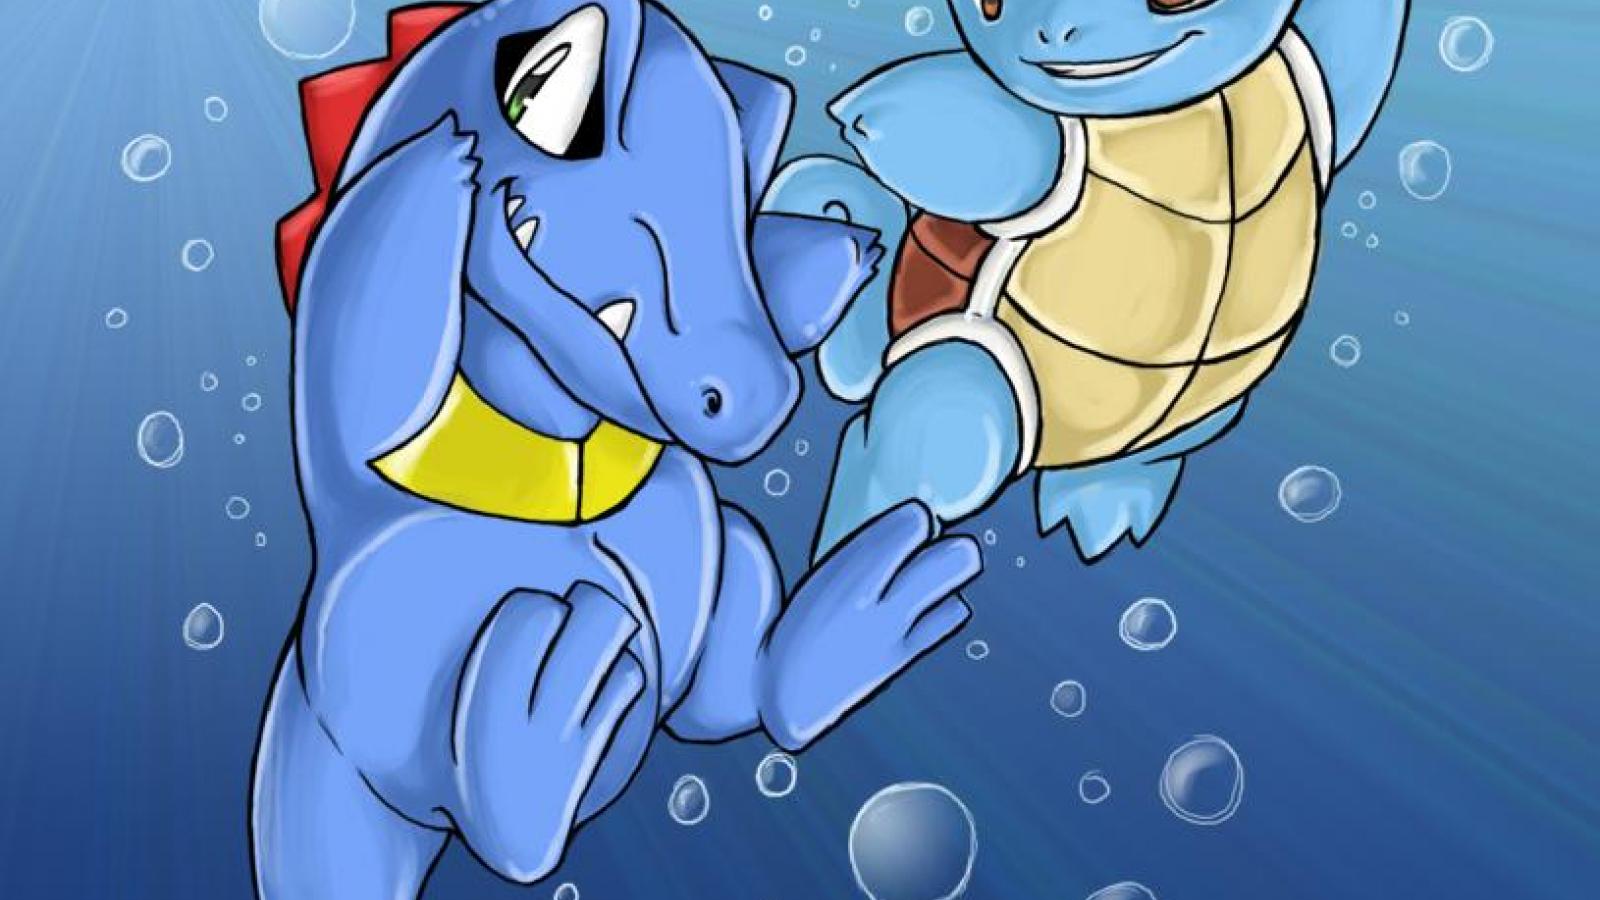 TOTODILE AND SQUIRTLE WALLPAPER - (#57589) - HD Wallpapers ...